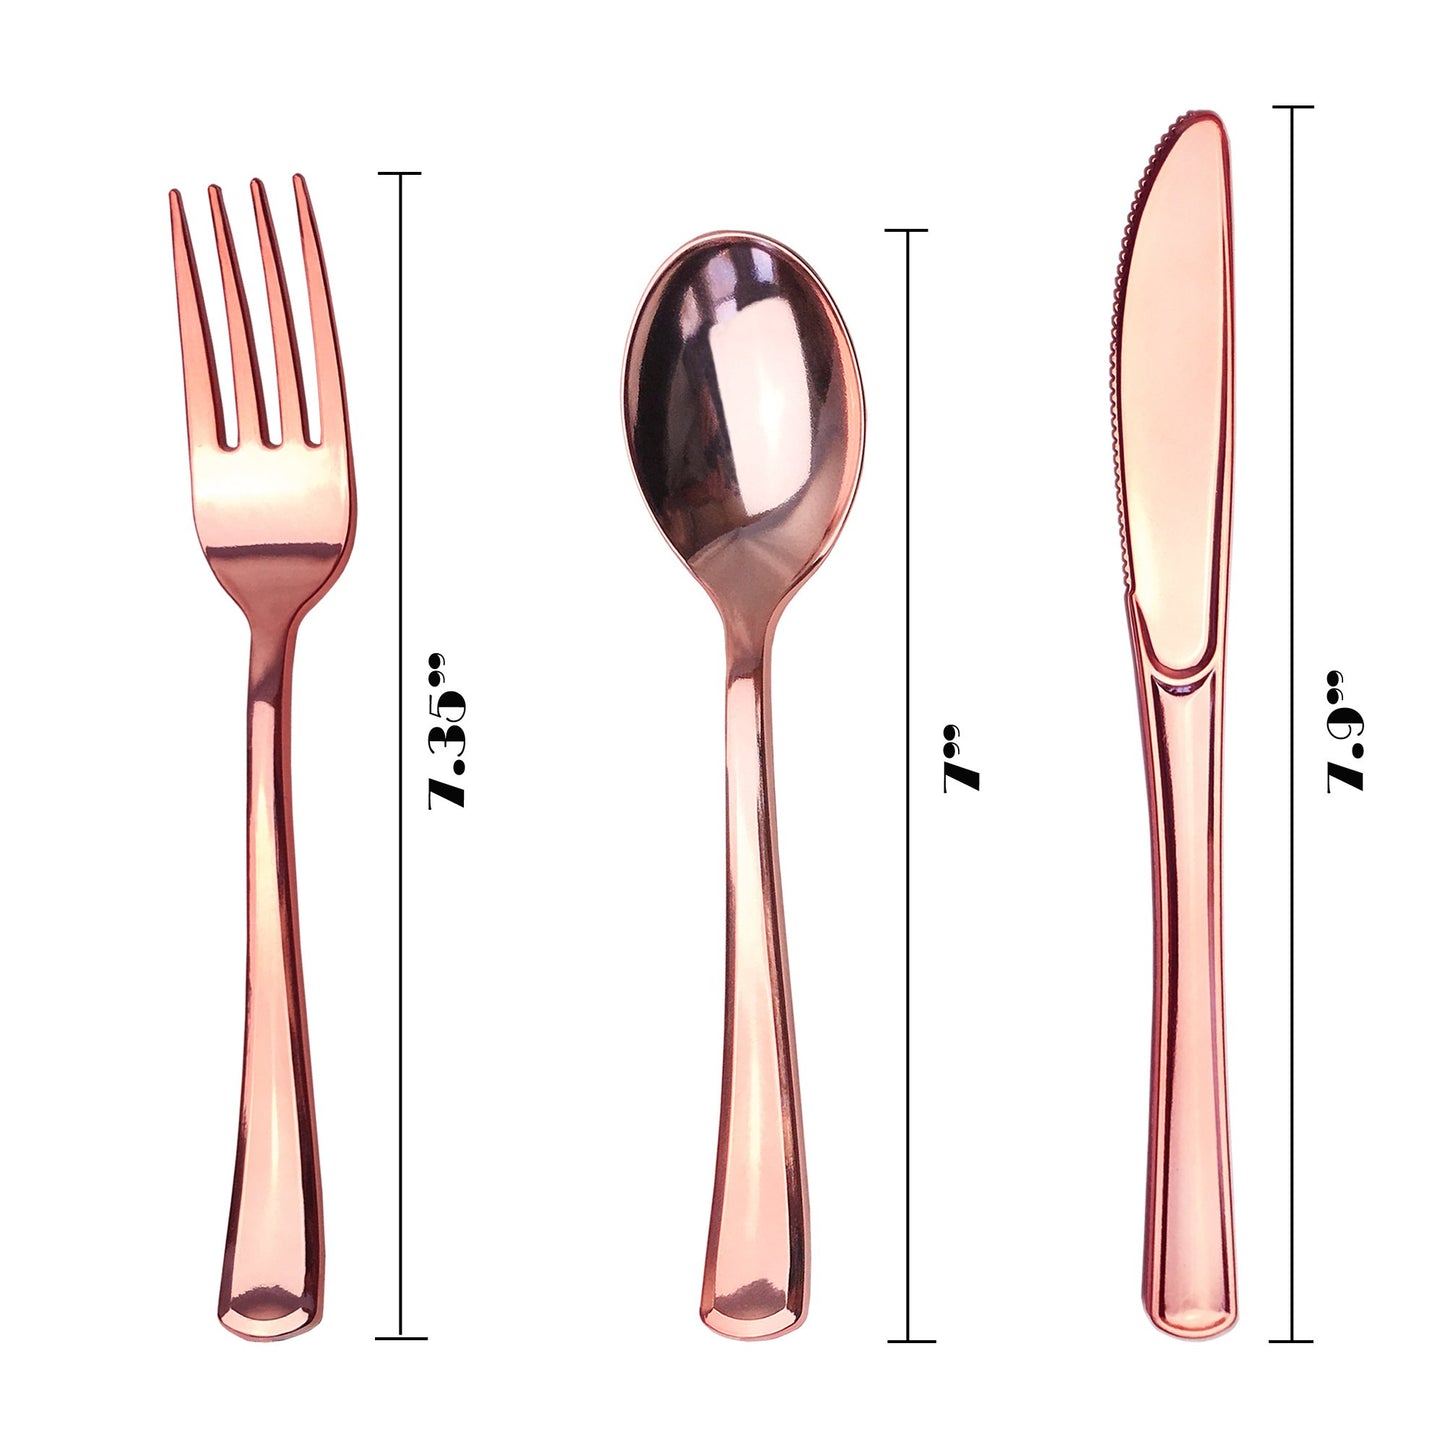 JL Prime 75 Rose Gold Plastic Silverware Set, Rose Gold Plastic Cutlery Set, Heavy Duty Utensils for Party & Wedding, Disposable Rose Gold Flatware, 25 Forks, 25 Spoons, 25 Knives